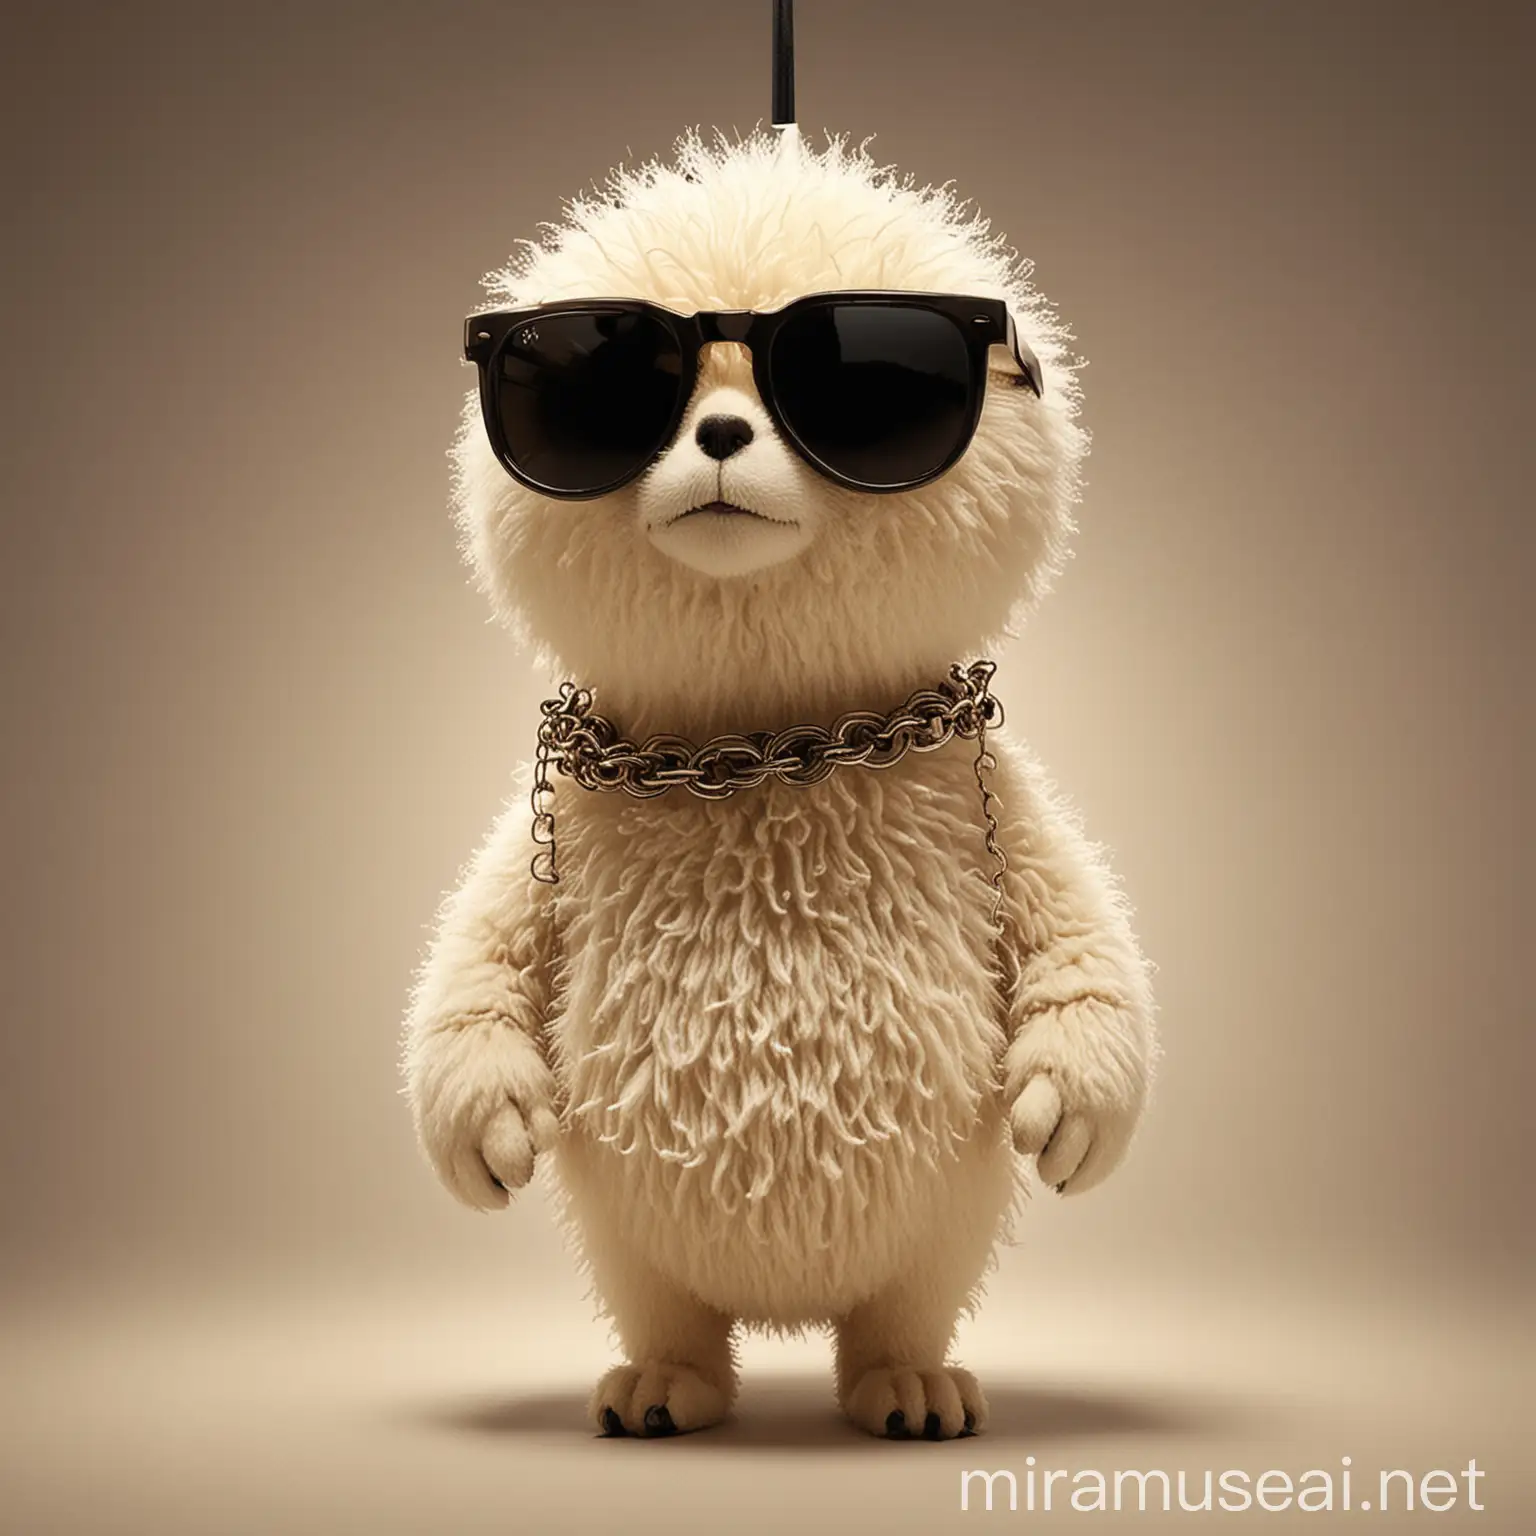 Adorable Fuzzy Lightbulb Character with Sunglasses and Error Chain